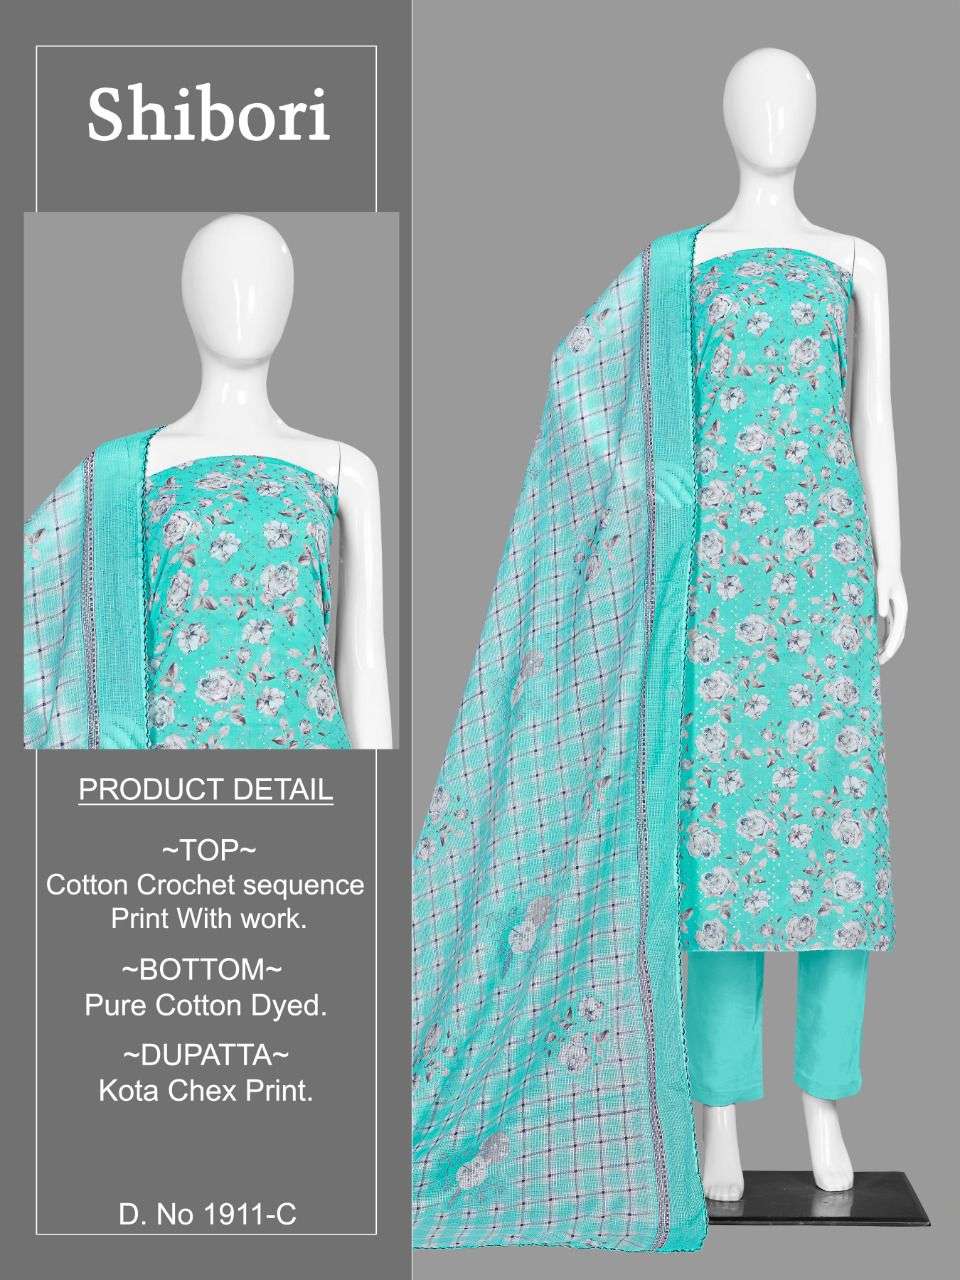 SHIBORI 1911 BY BIPSON 1911-A TO 1911-D SERIES BEAUTIFUL WINTER COLLECTION SUITS STYLISH FANCY COLORFUL CASUAL WEAR & ETHNIC WEAR PURE COTTON PRINT WITH WORK DRESSES AT WHOLESALE PRICE